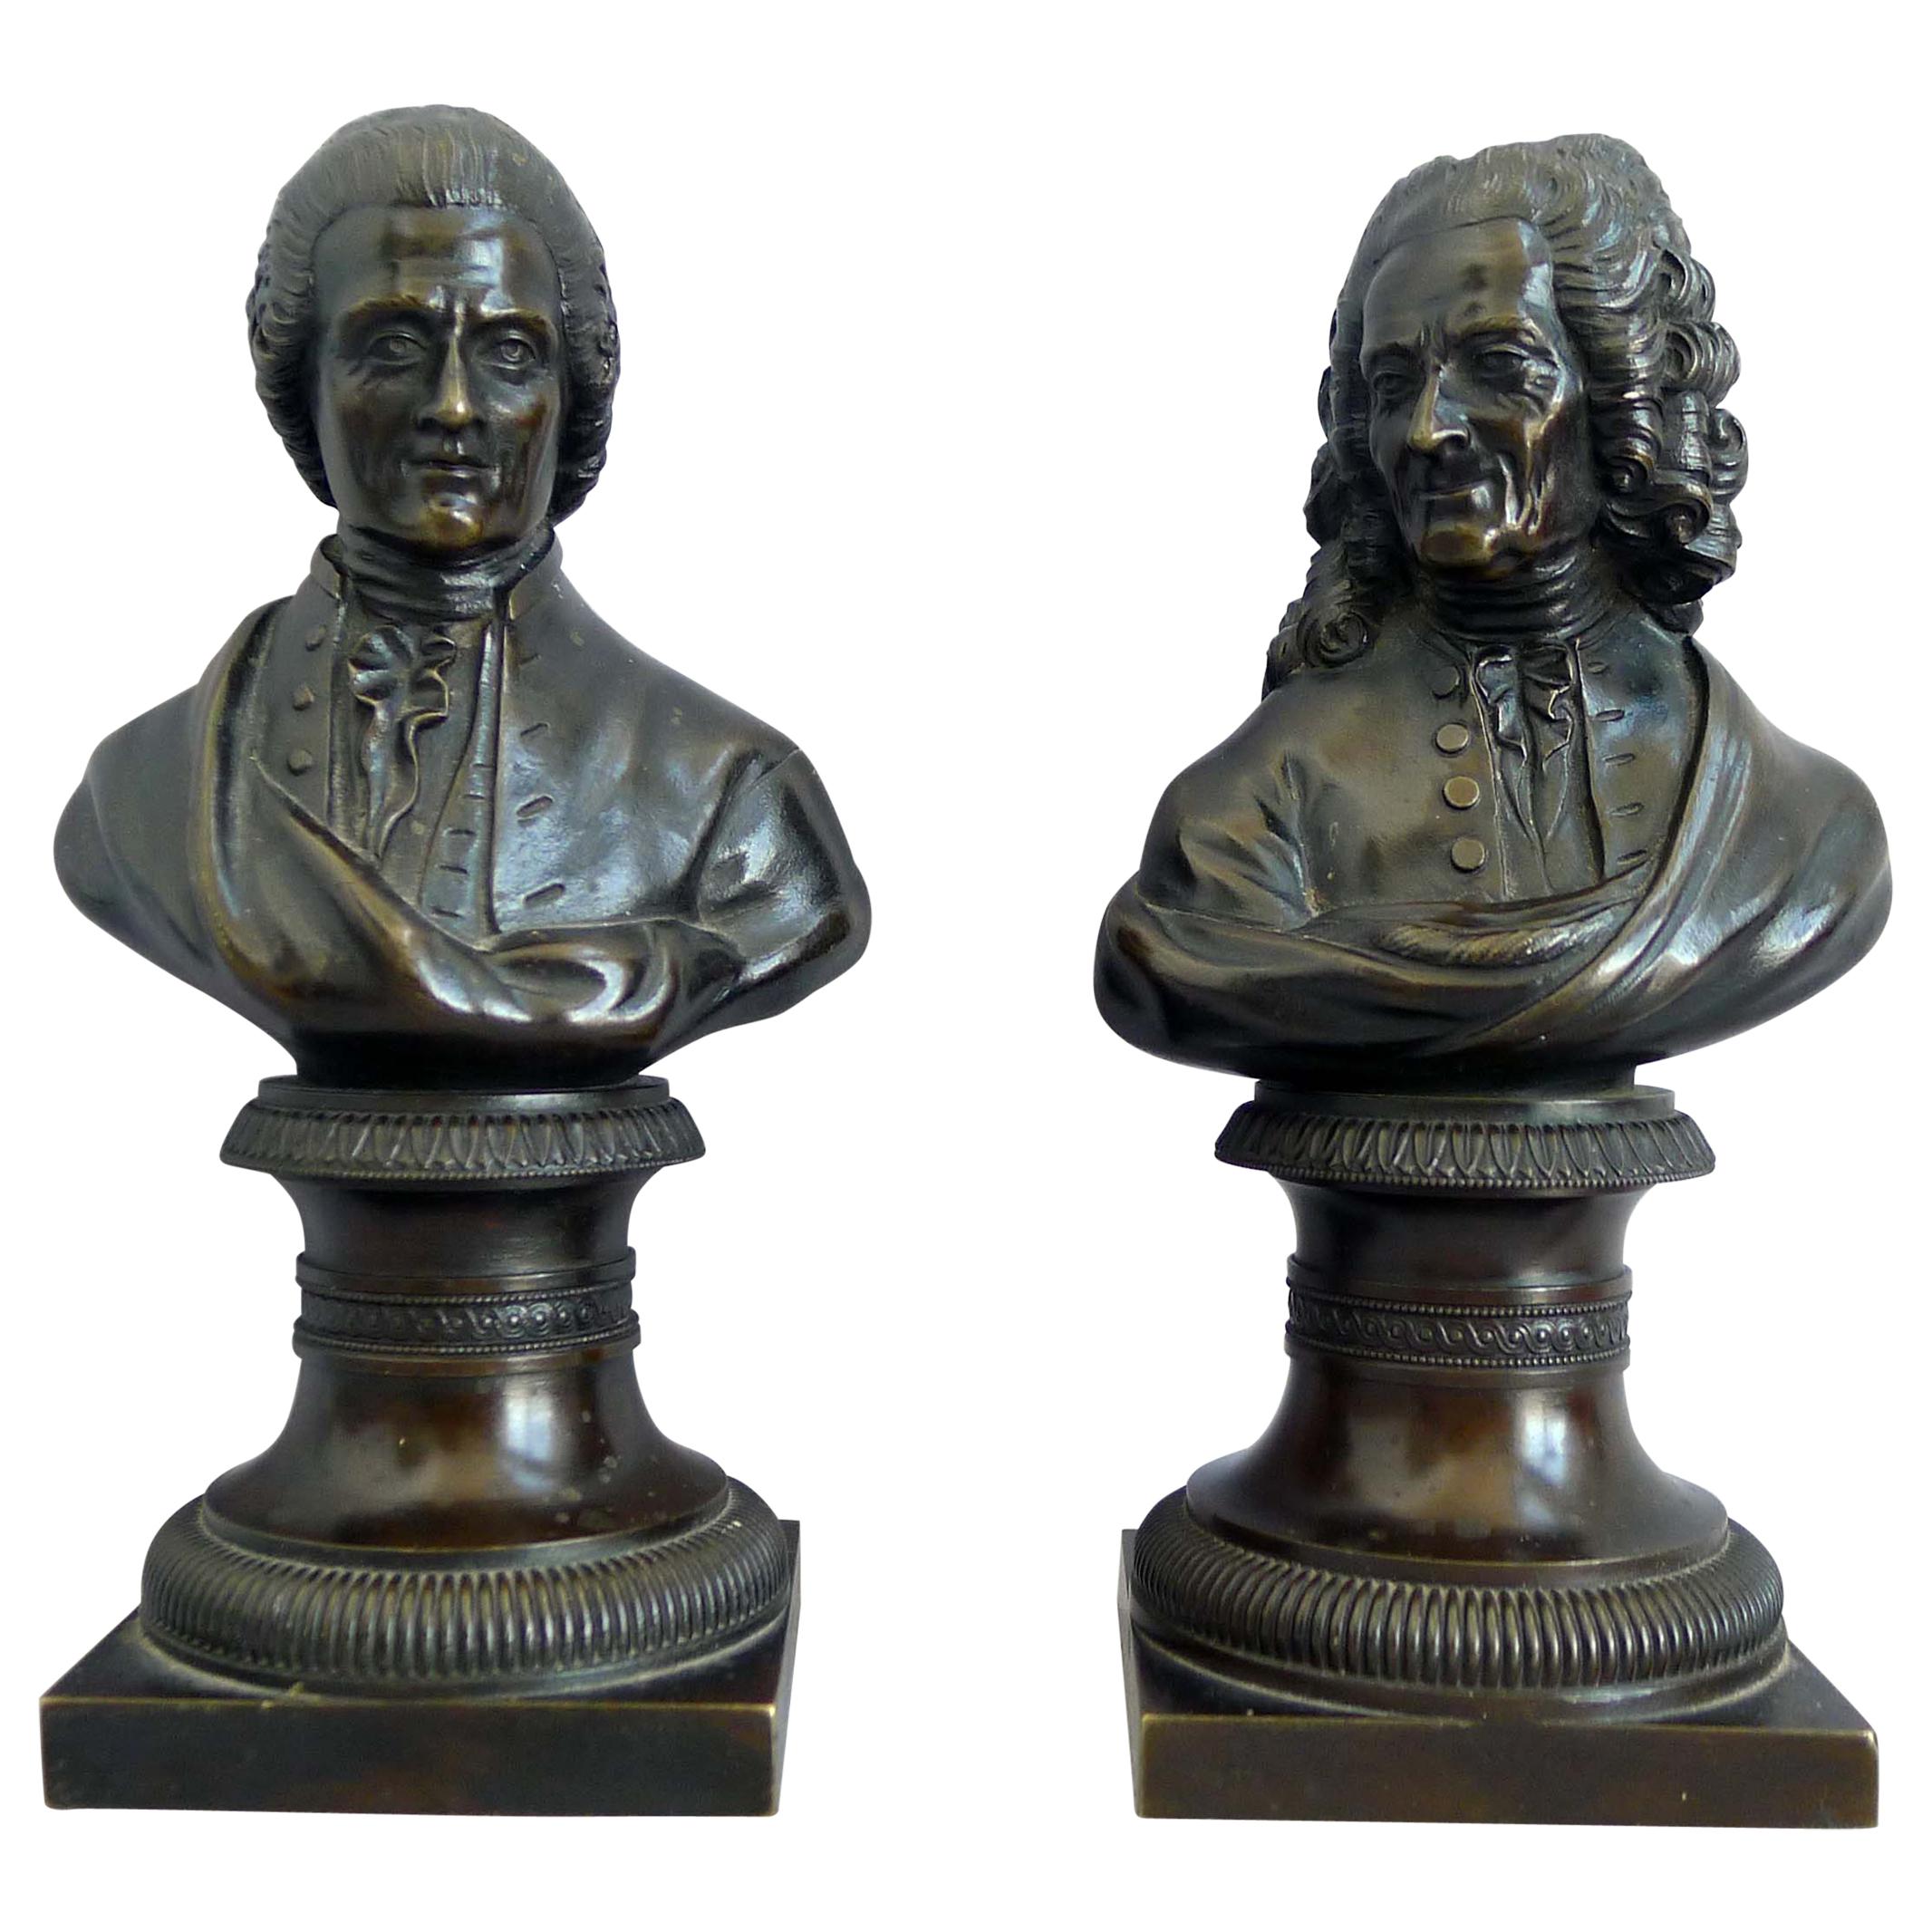 Pair of Bronze Busts of Rousseau and Voltaire